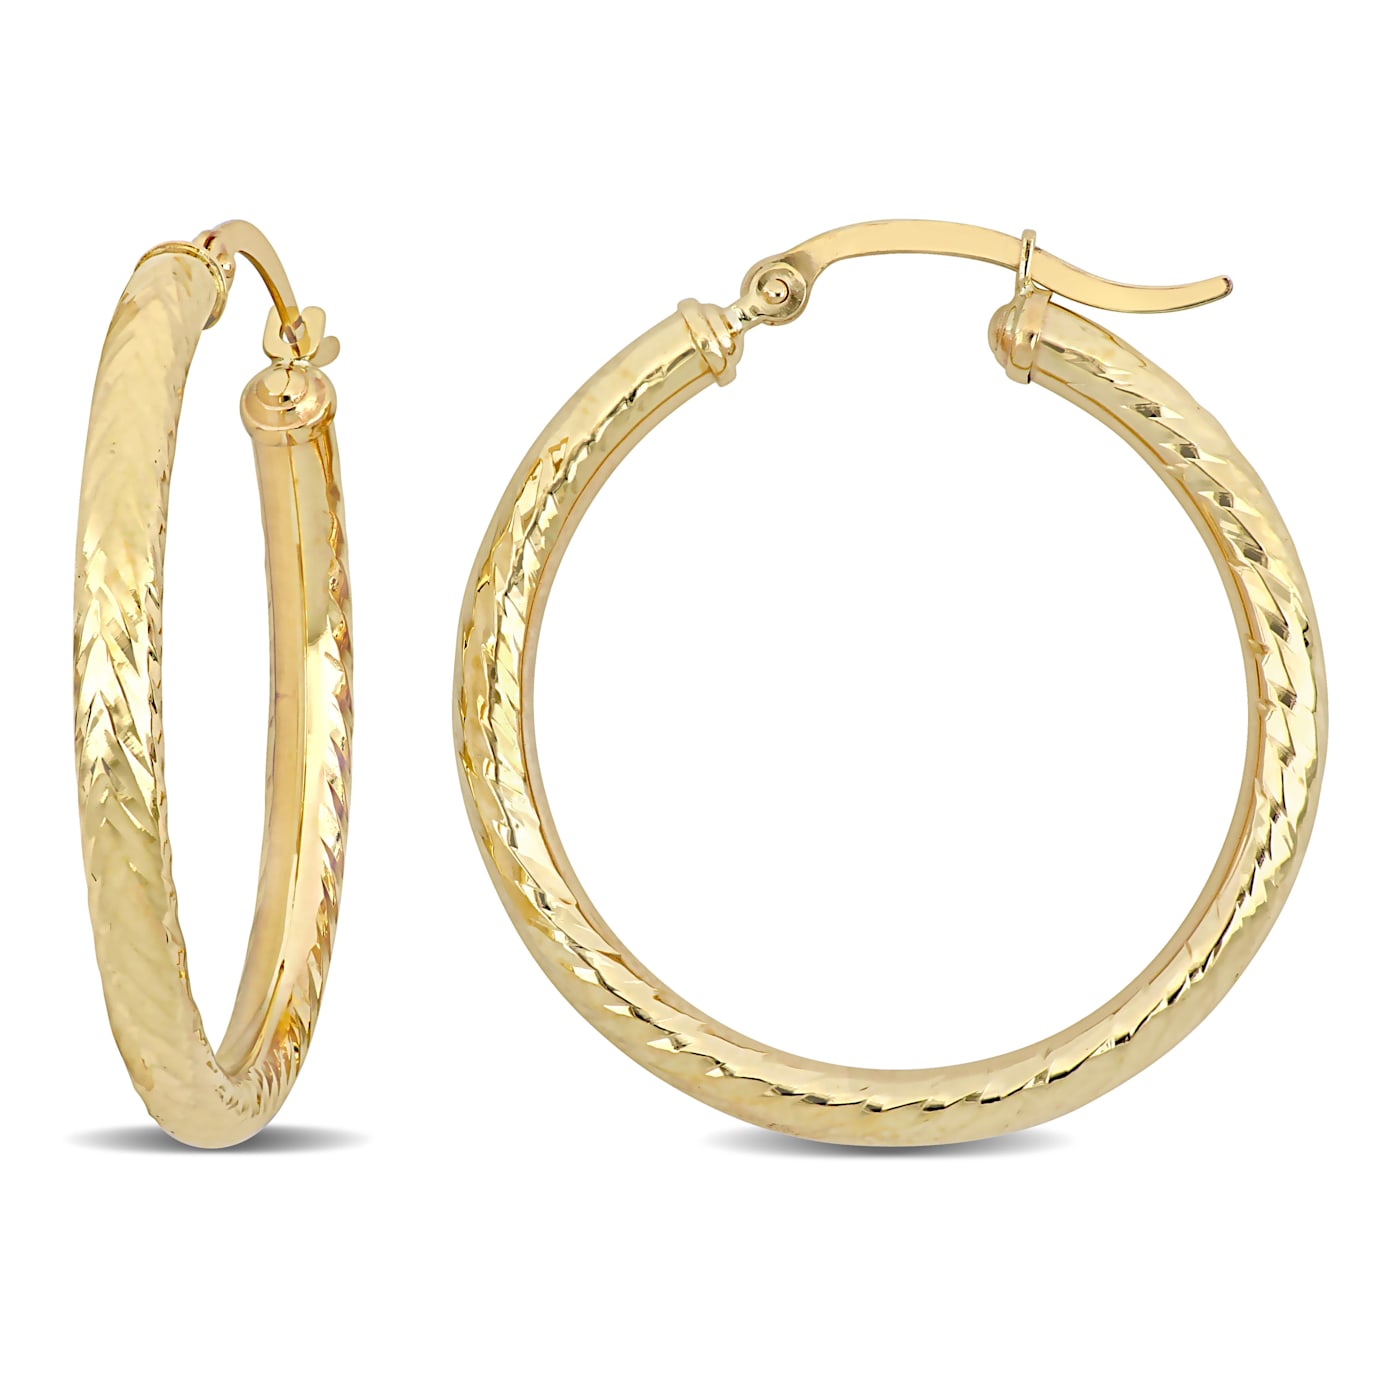 32mm Textured Hoop Earrings in 10k Yellow Gold - 1BKL3A